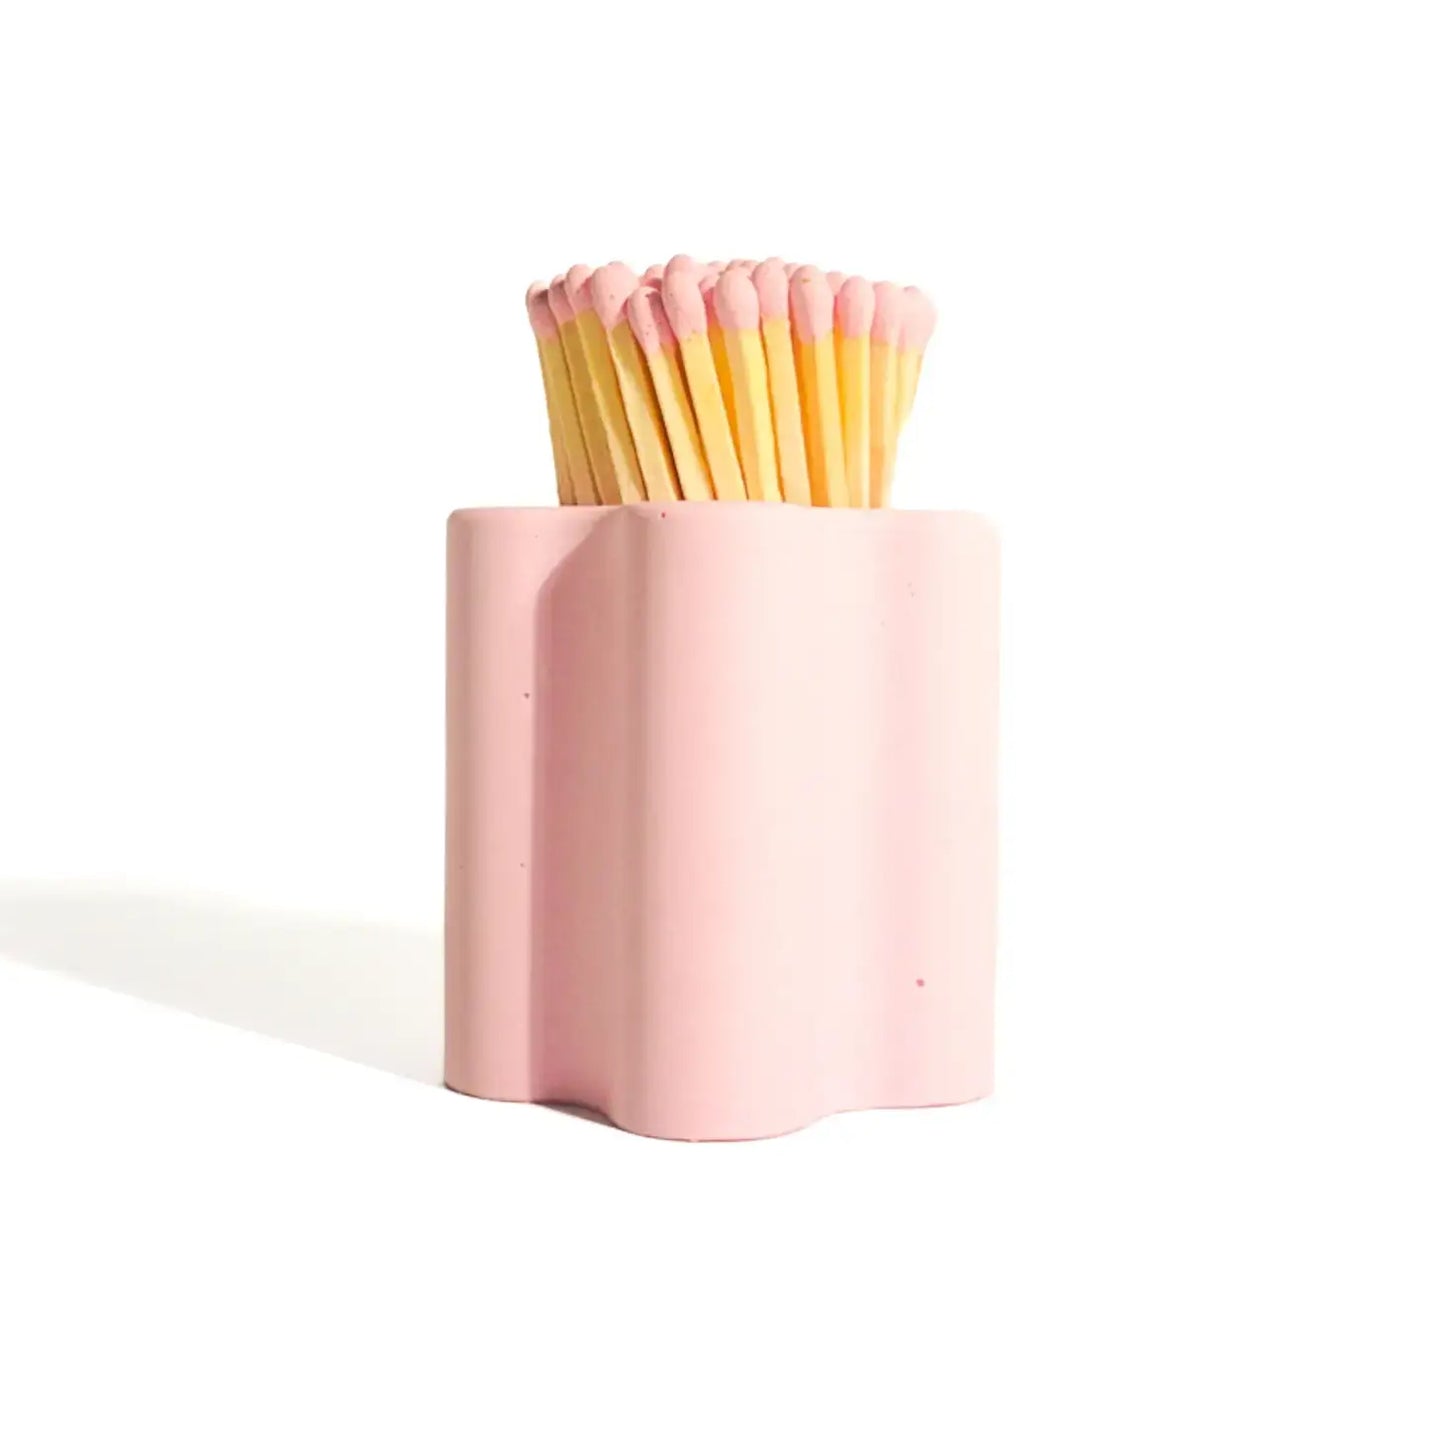 Pastel Flower Vessel with Colorful Matchsticks: Green